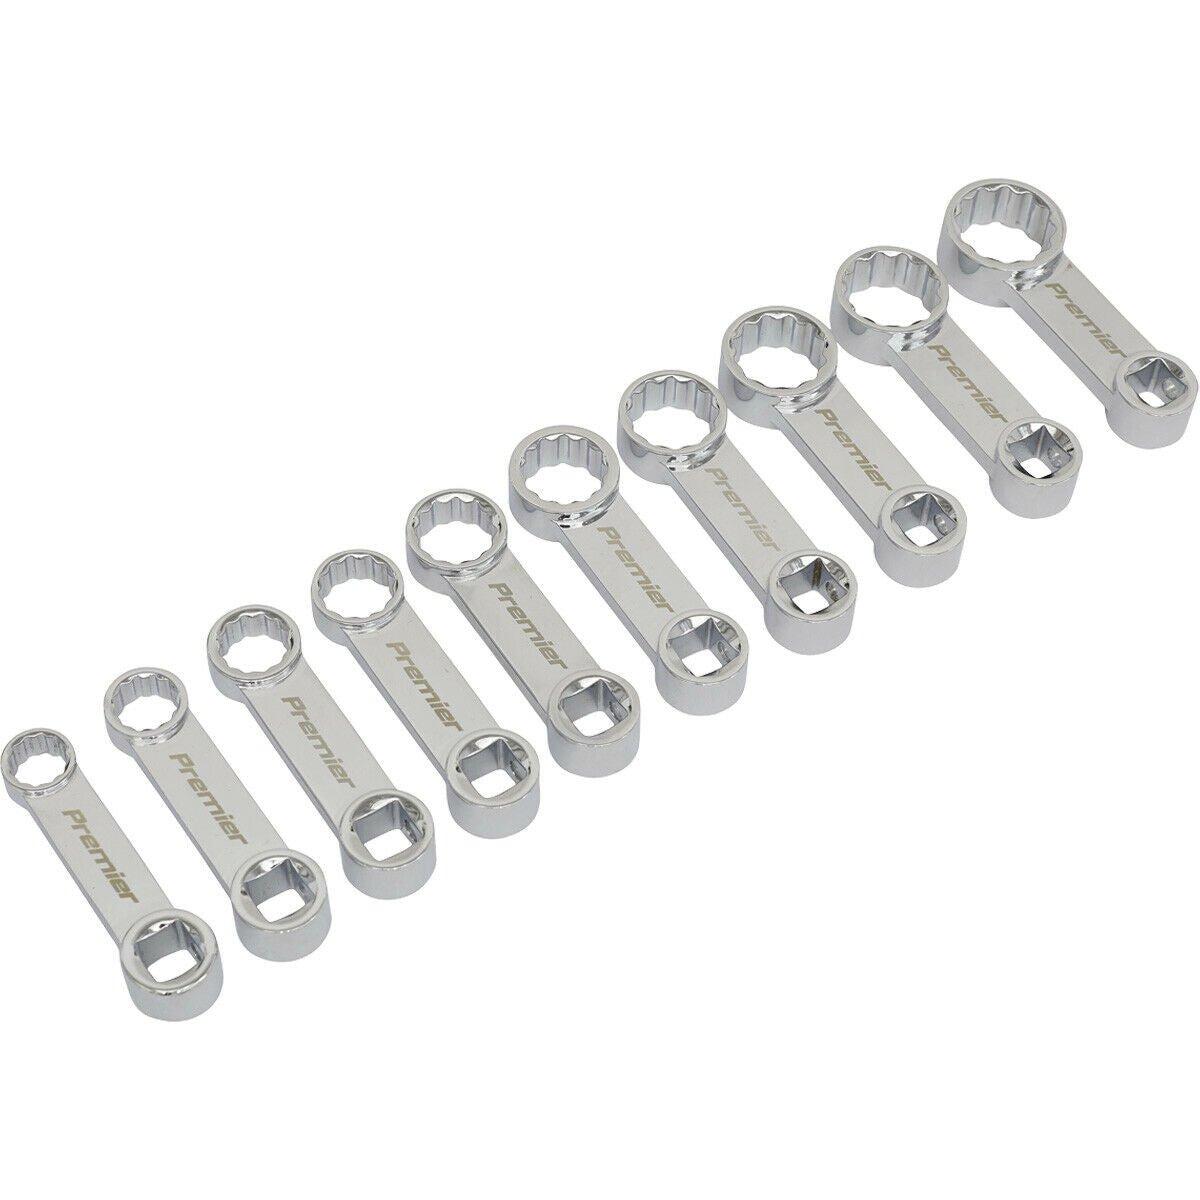 10pc Torque Wrench Spanner Adapter Set - 3/8